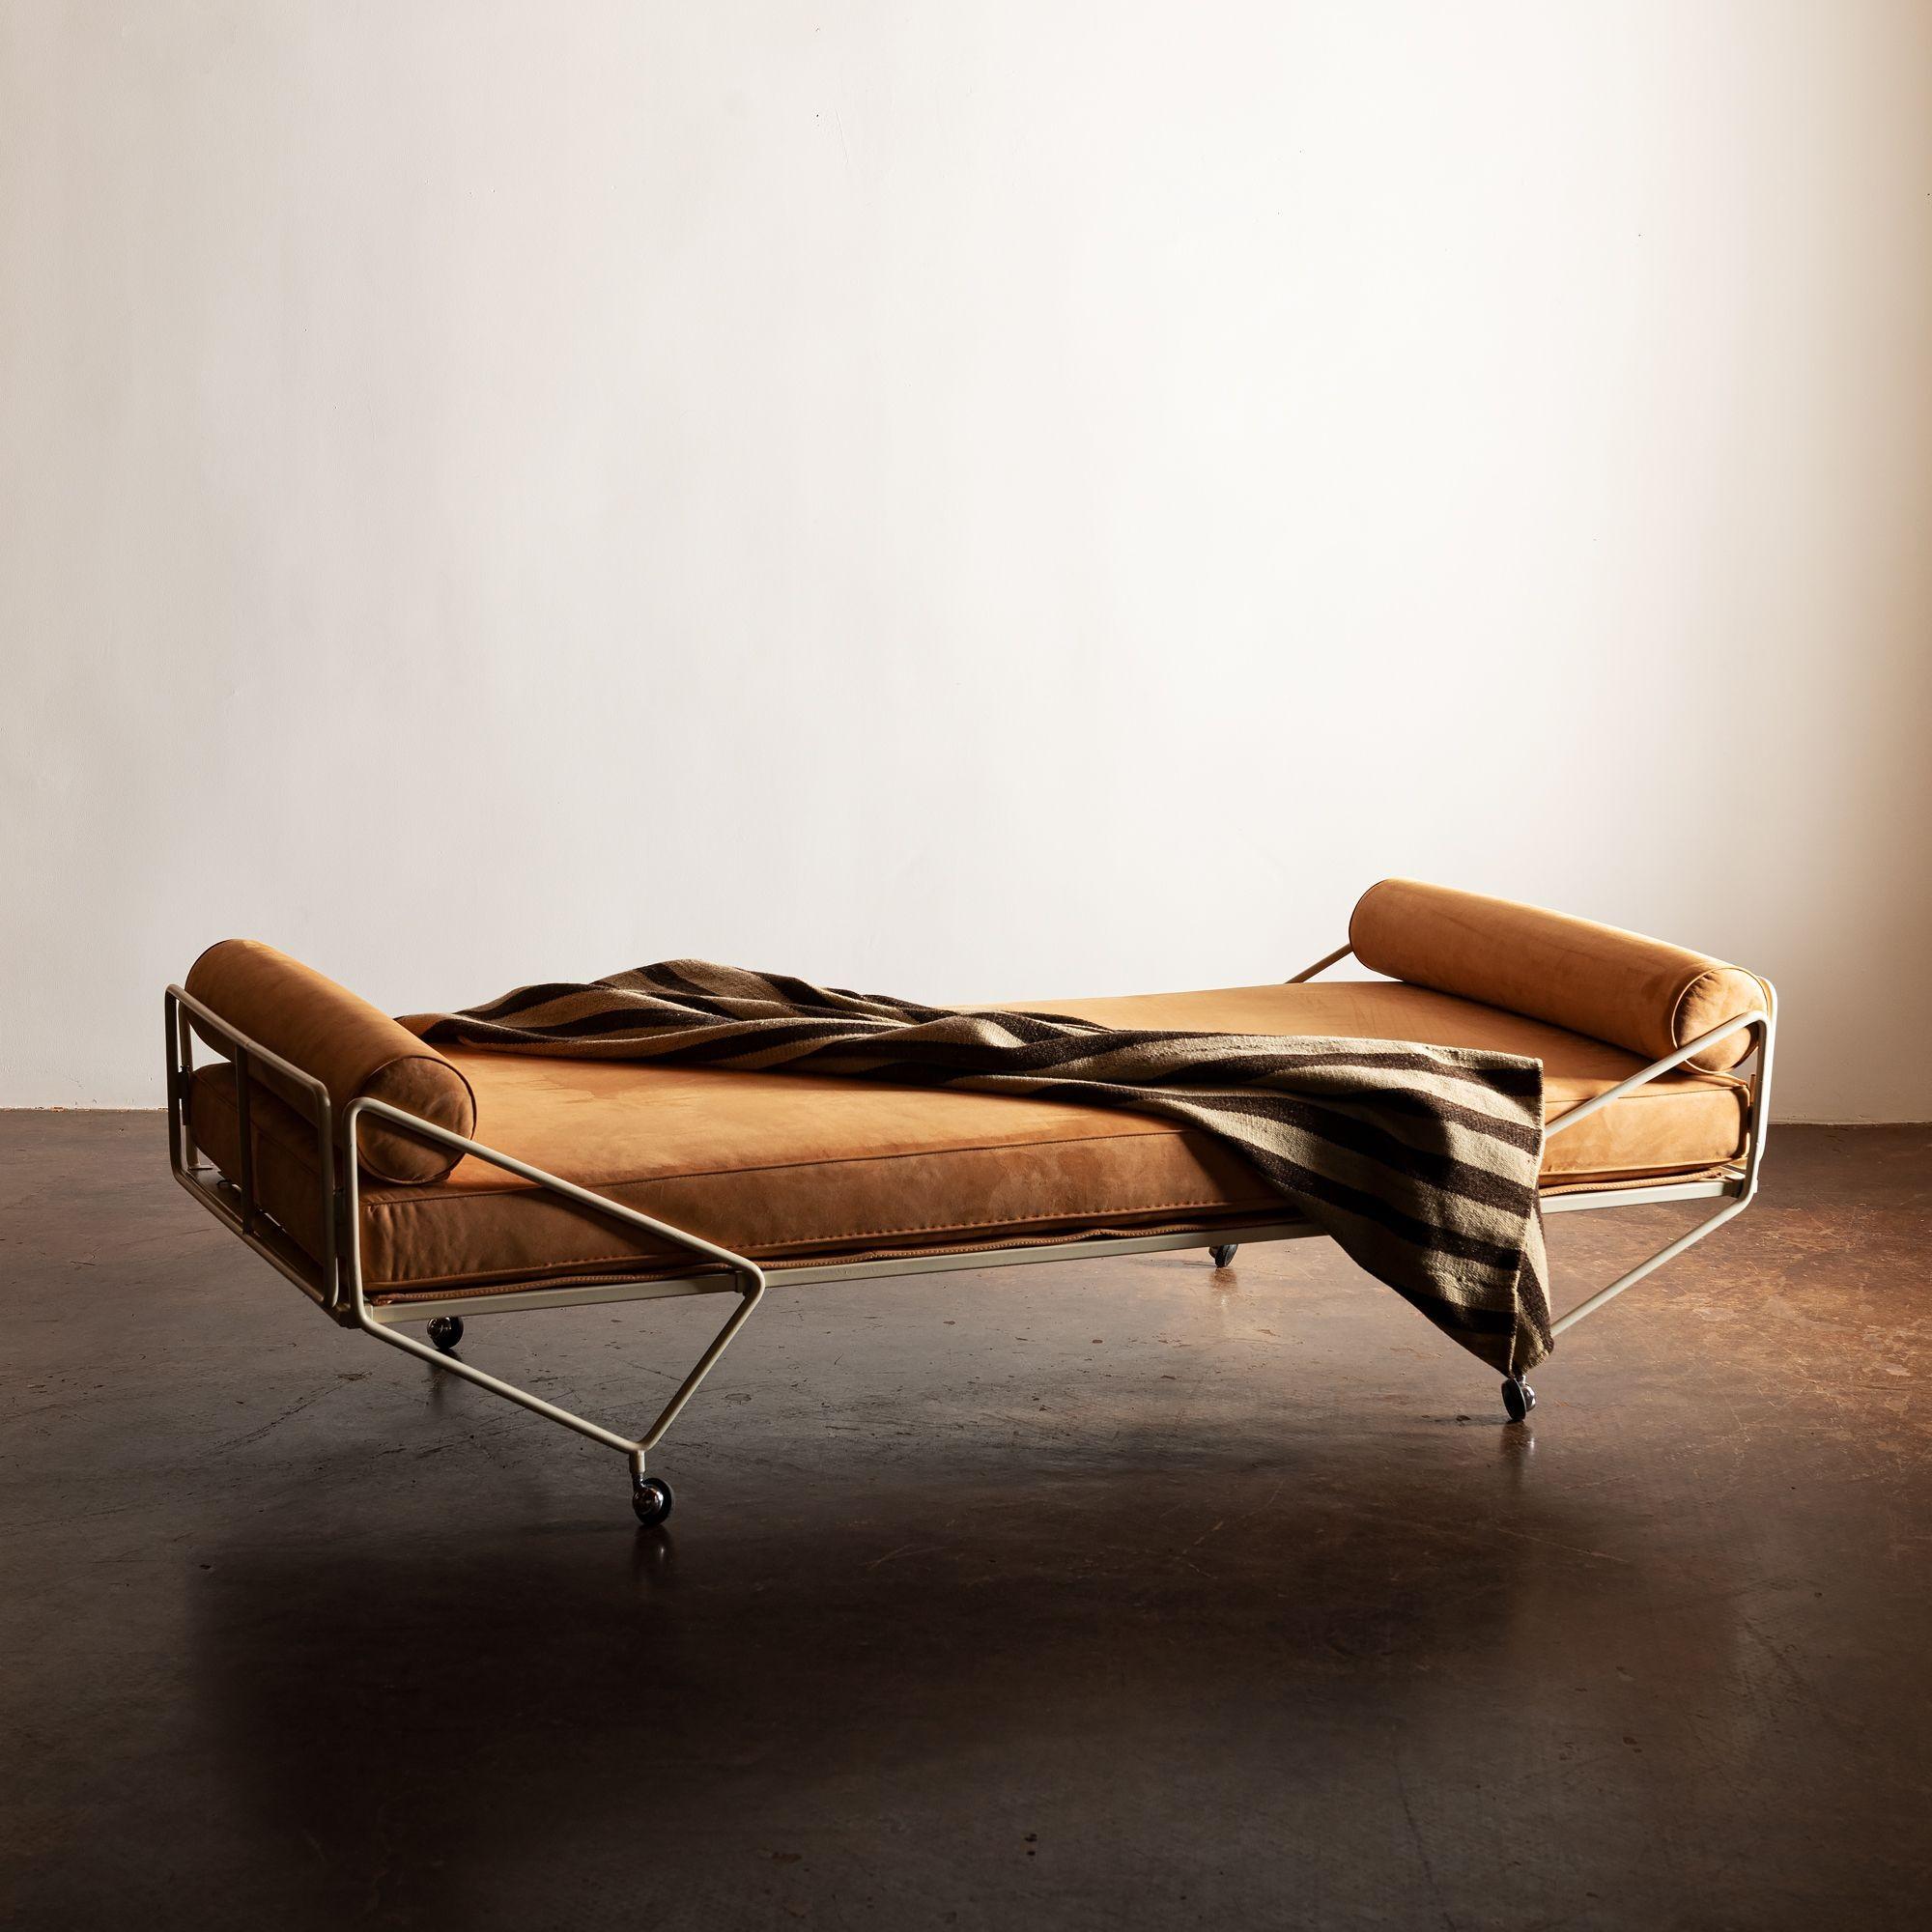 A rare example of the Apta Series Daybed, which was produced by Gio Ponti's brother Walter Ponti. This piece was never mass produced nor distributed outside the family until recently, when the few examples have been sold by family members. This is